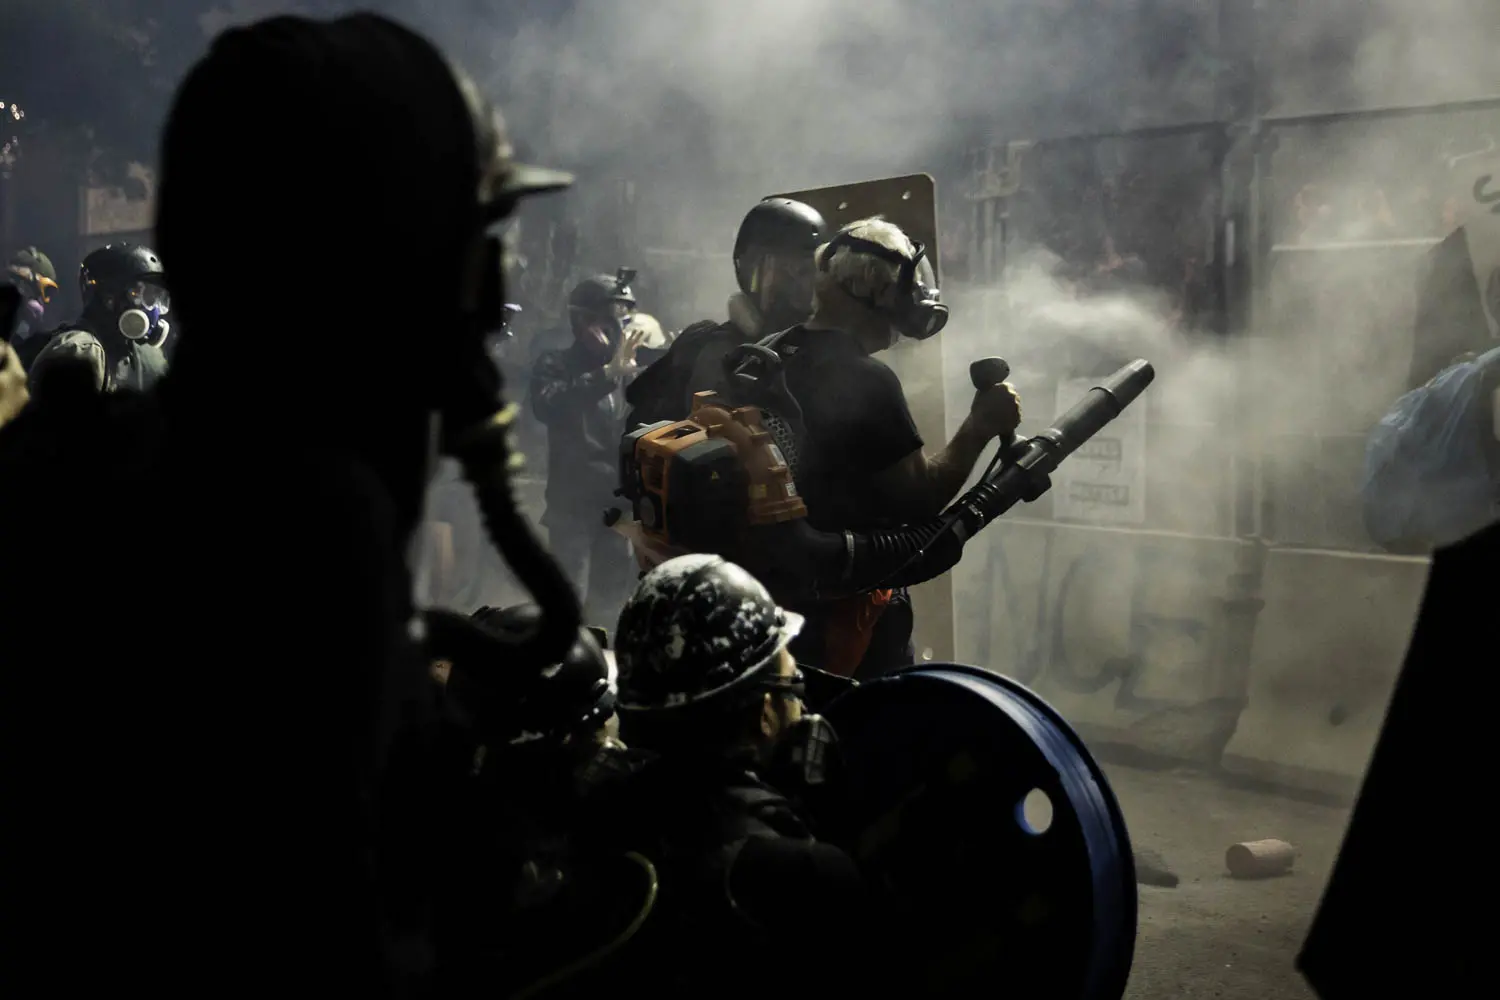 A man in a gas mask and with a leafblower stands next to a police barricade as tear gas fills the air